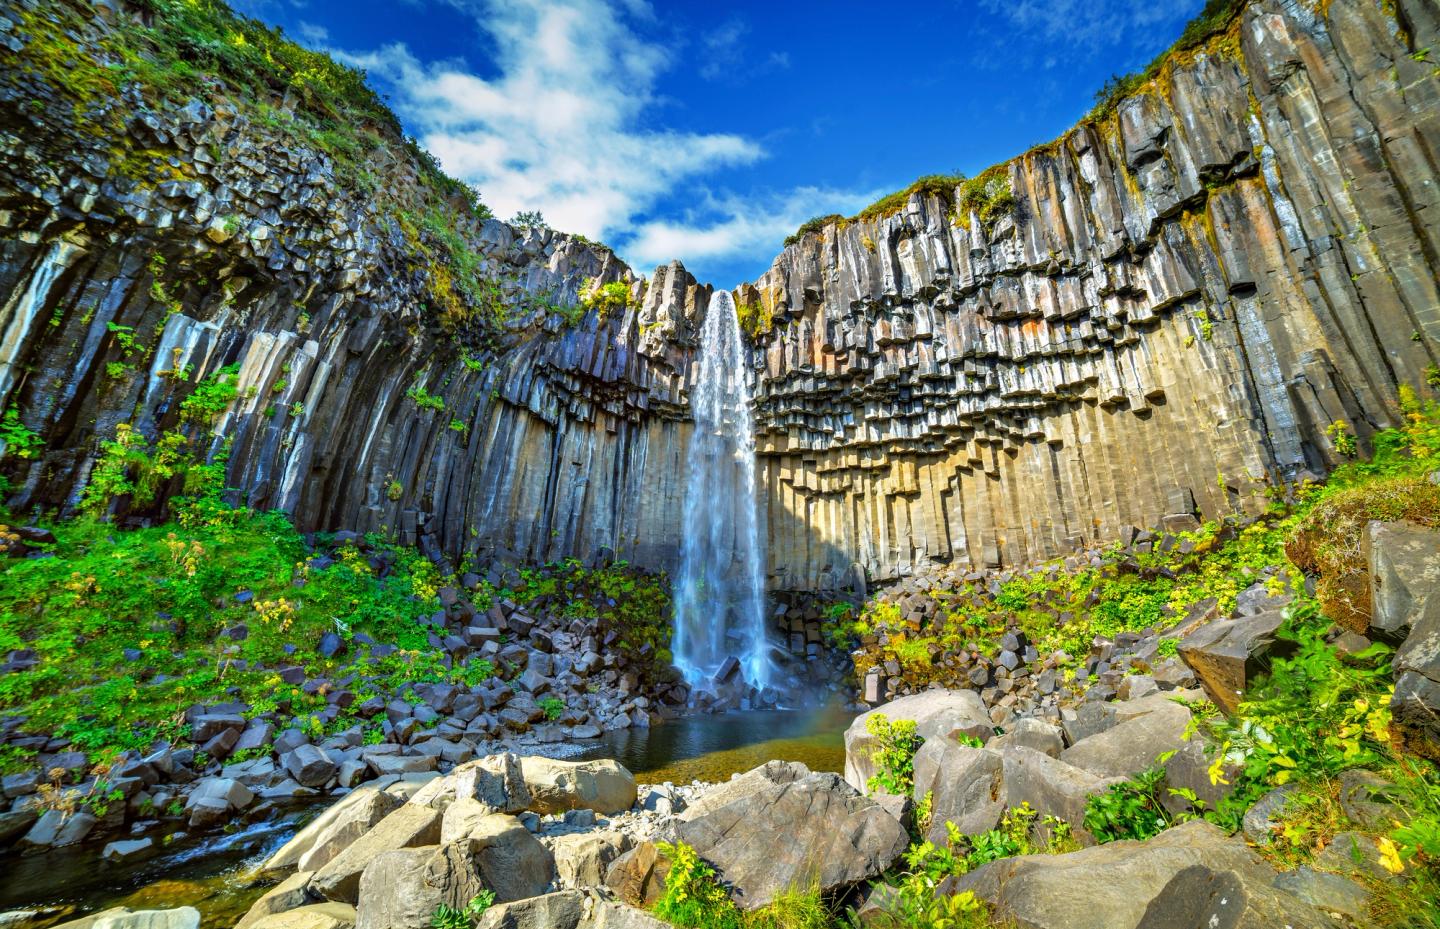 A stunning view of Svartifoss Waterfall in Iceland illuminated by bright sunlight.